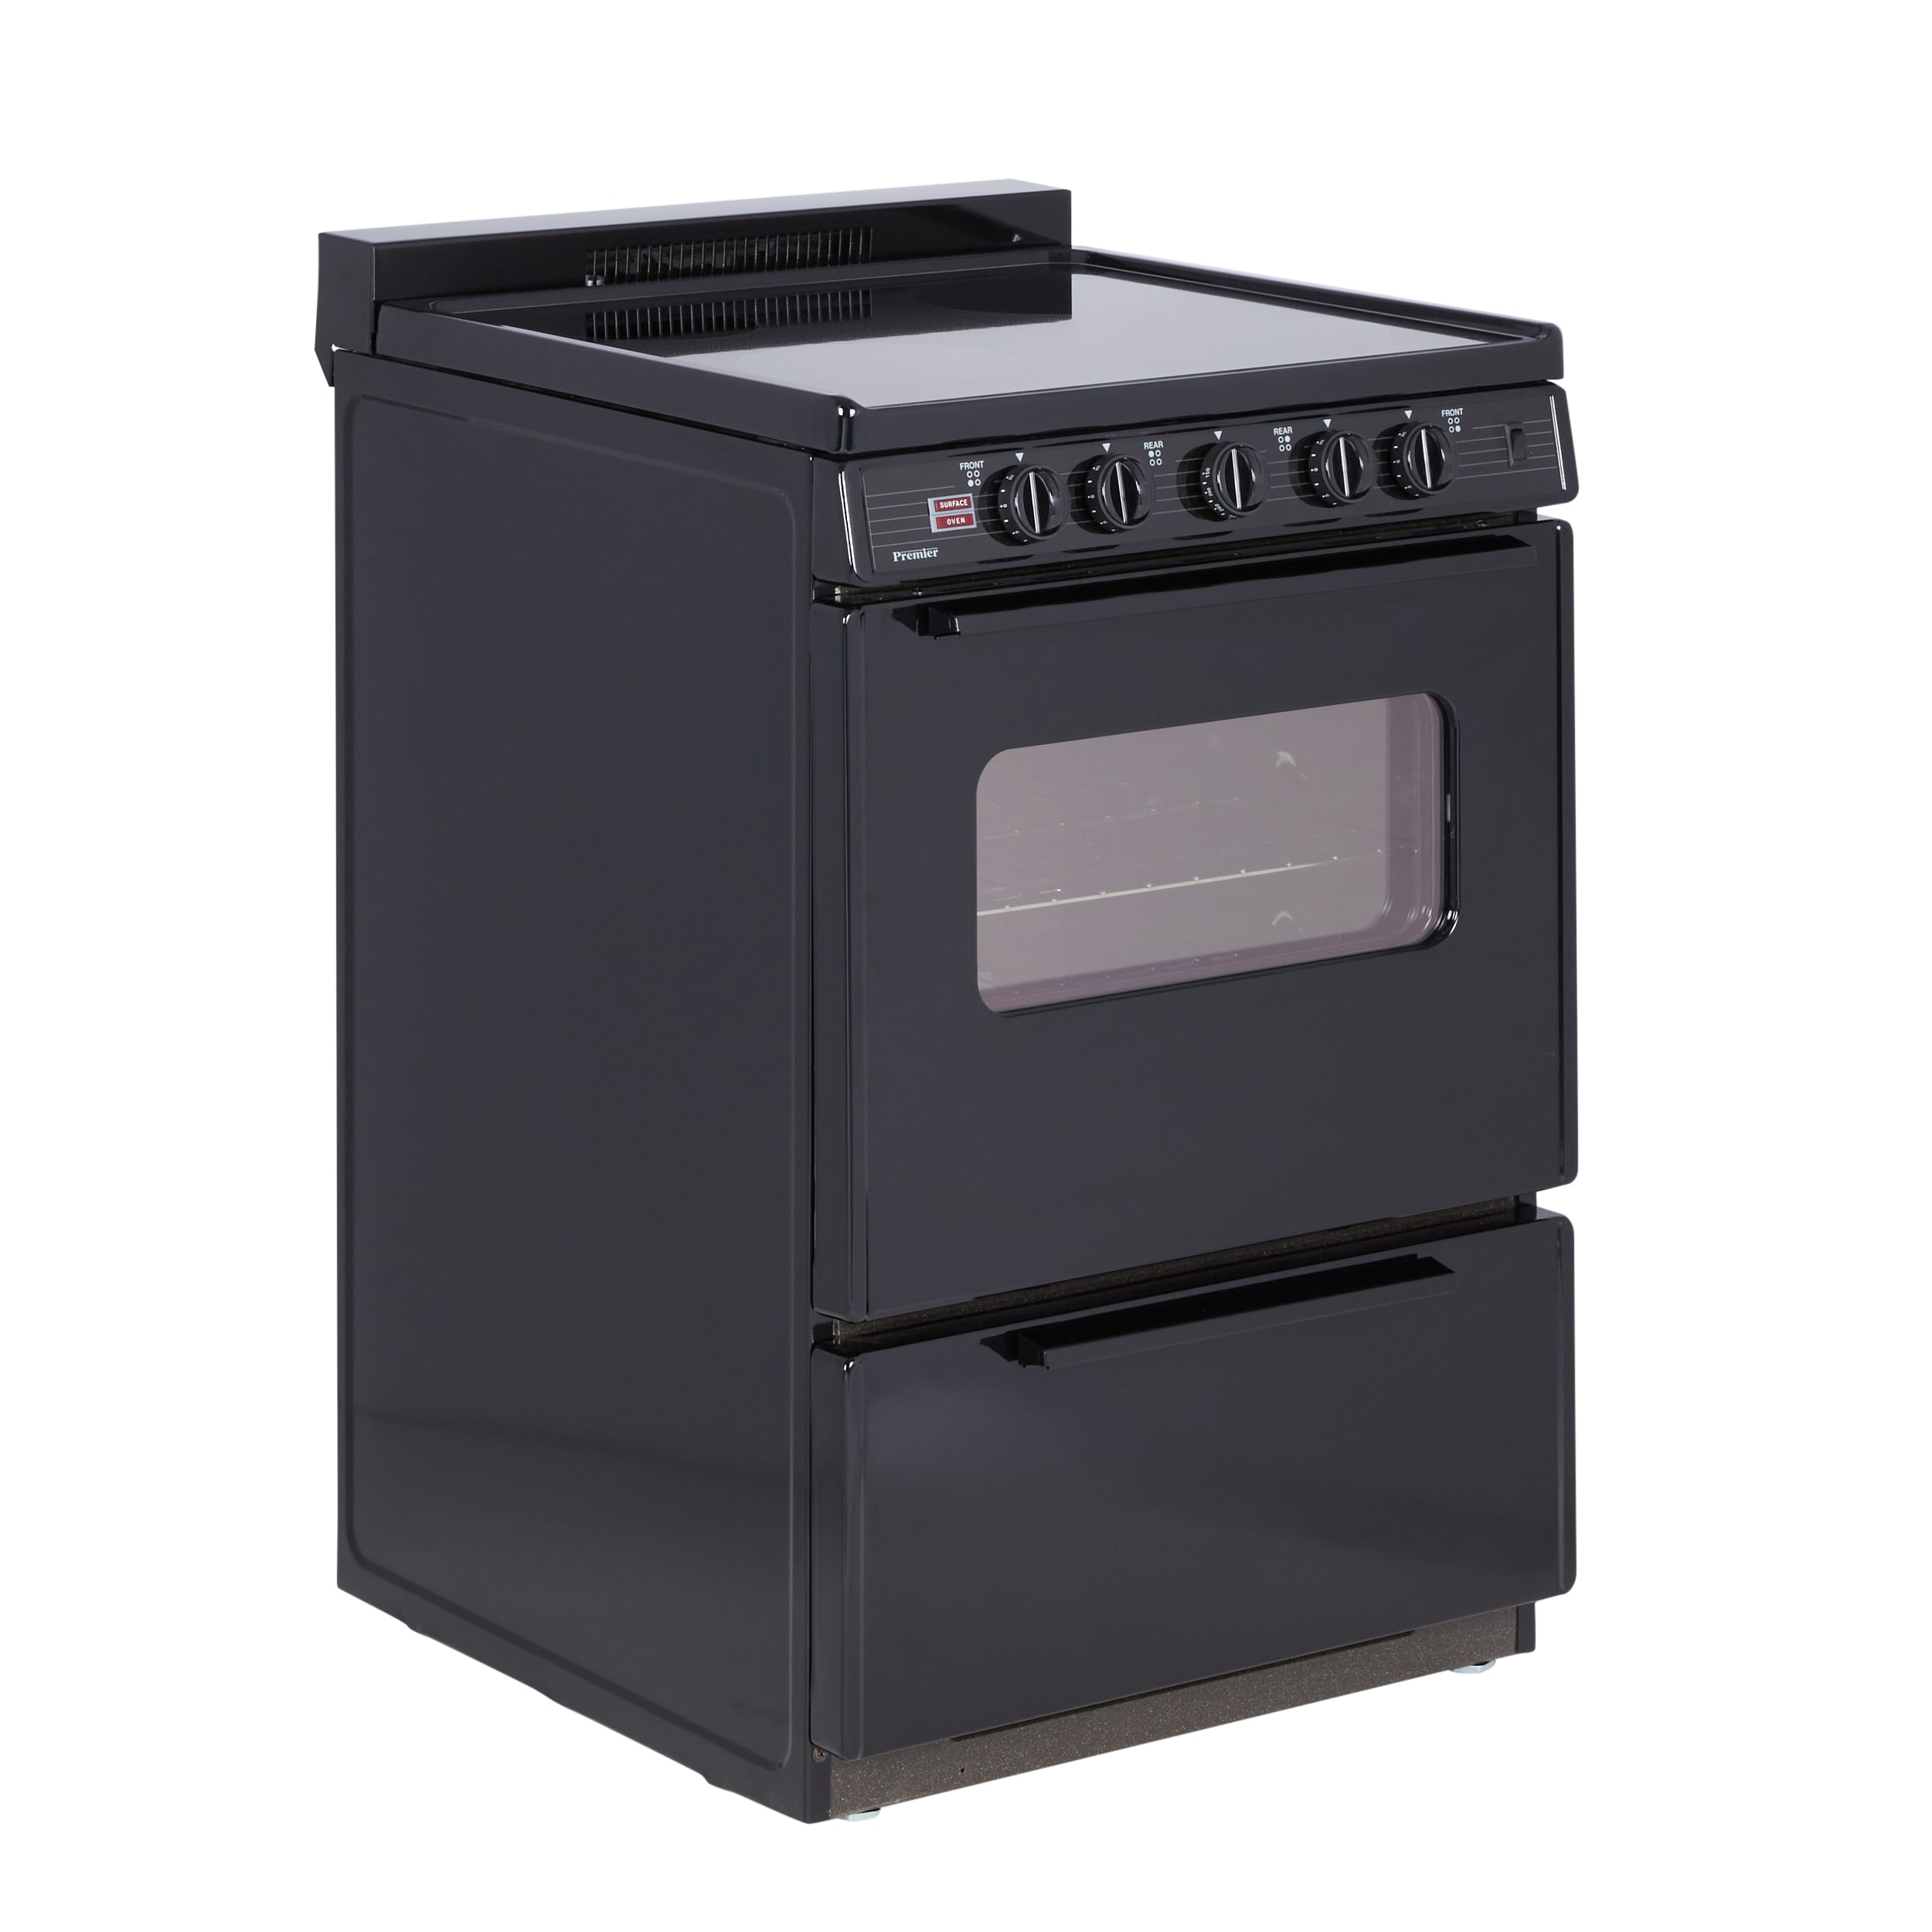 Premier ECK600BP 24 Inch Freestanding Electric Range with 4 Coil Elements,  Stainless Steel Body, Manual Clean, 2 Adjustable Oven Racks, ADA Compliant  and 1 1/2 Inch Black Porcelain Vent Rail